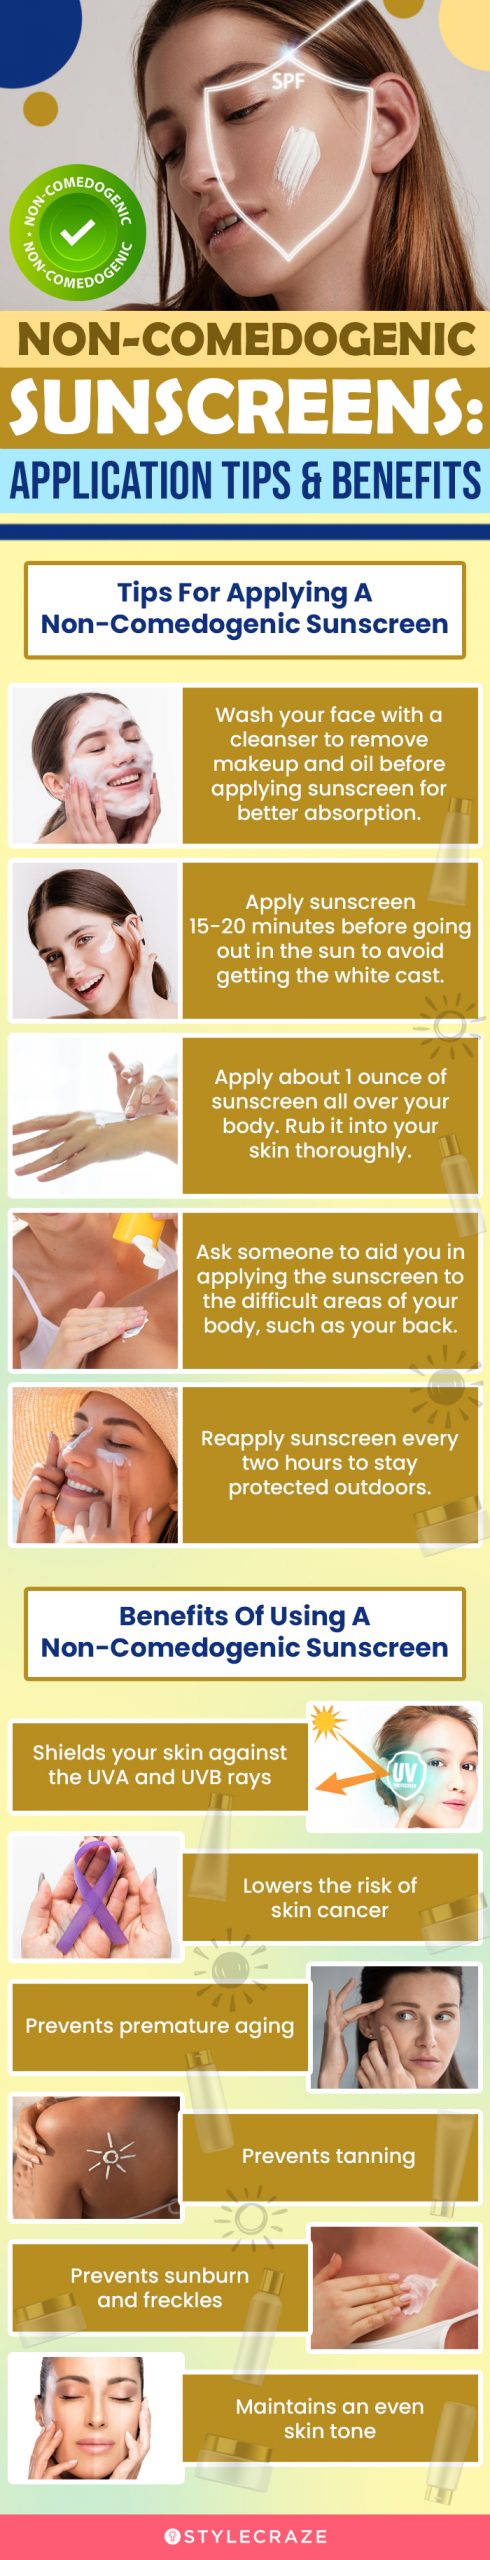 Non-Comedogenic Sunscreen: Application Tips & Benefits (infographic)